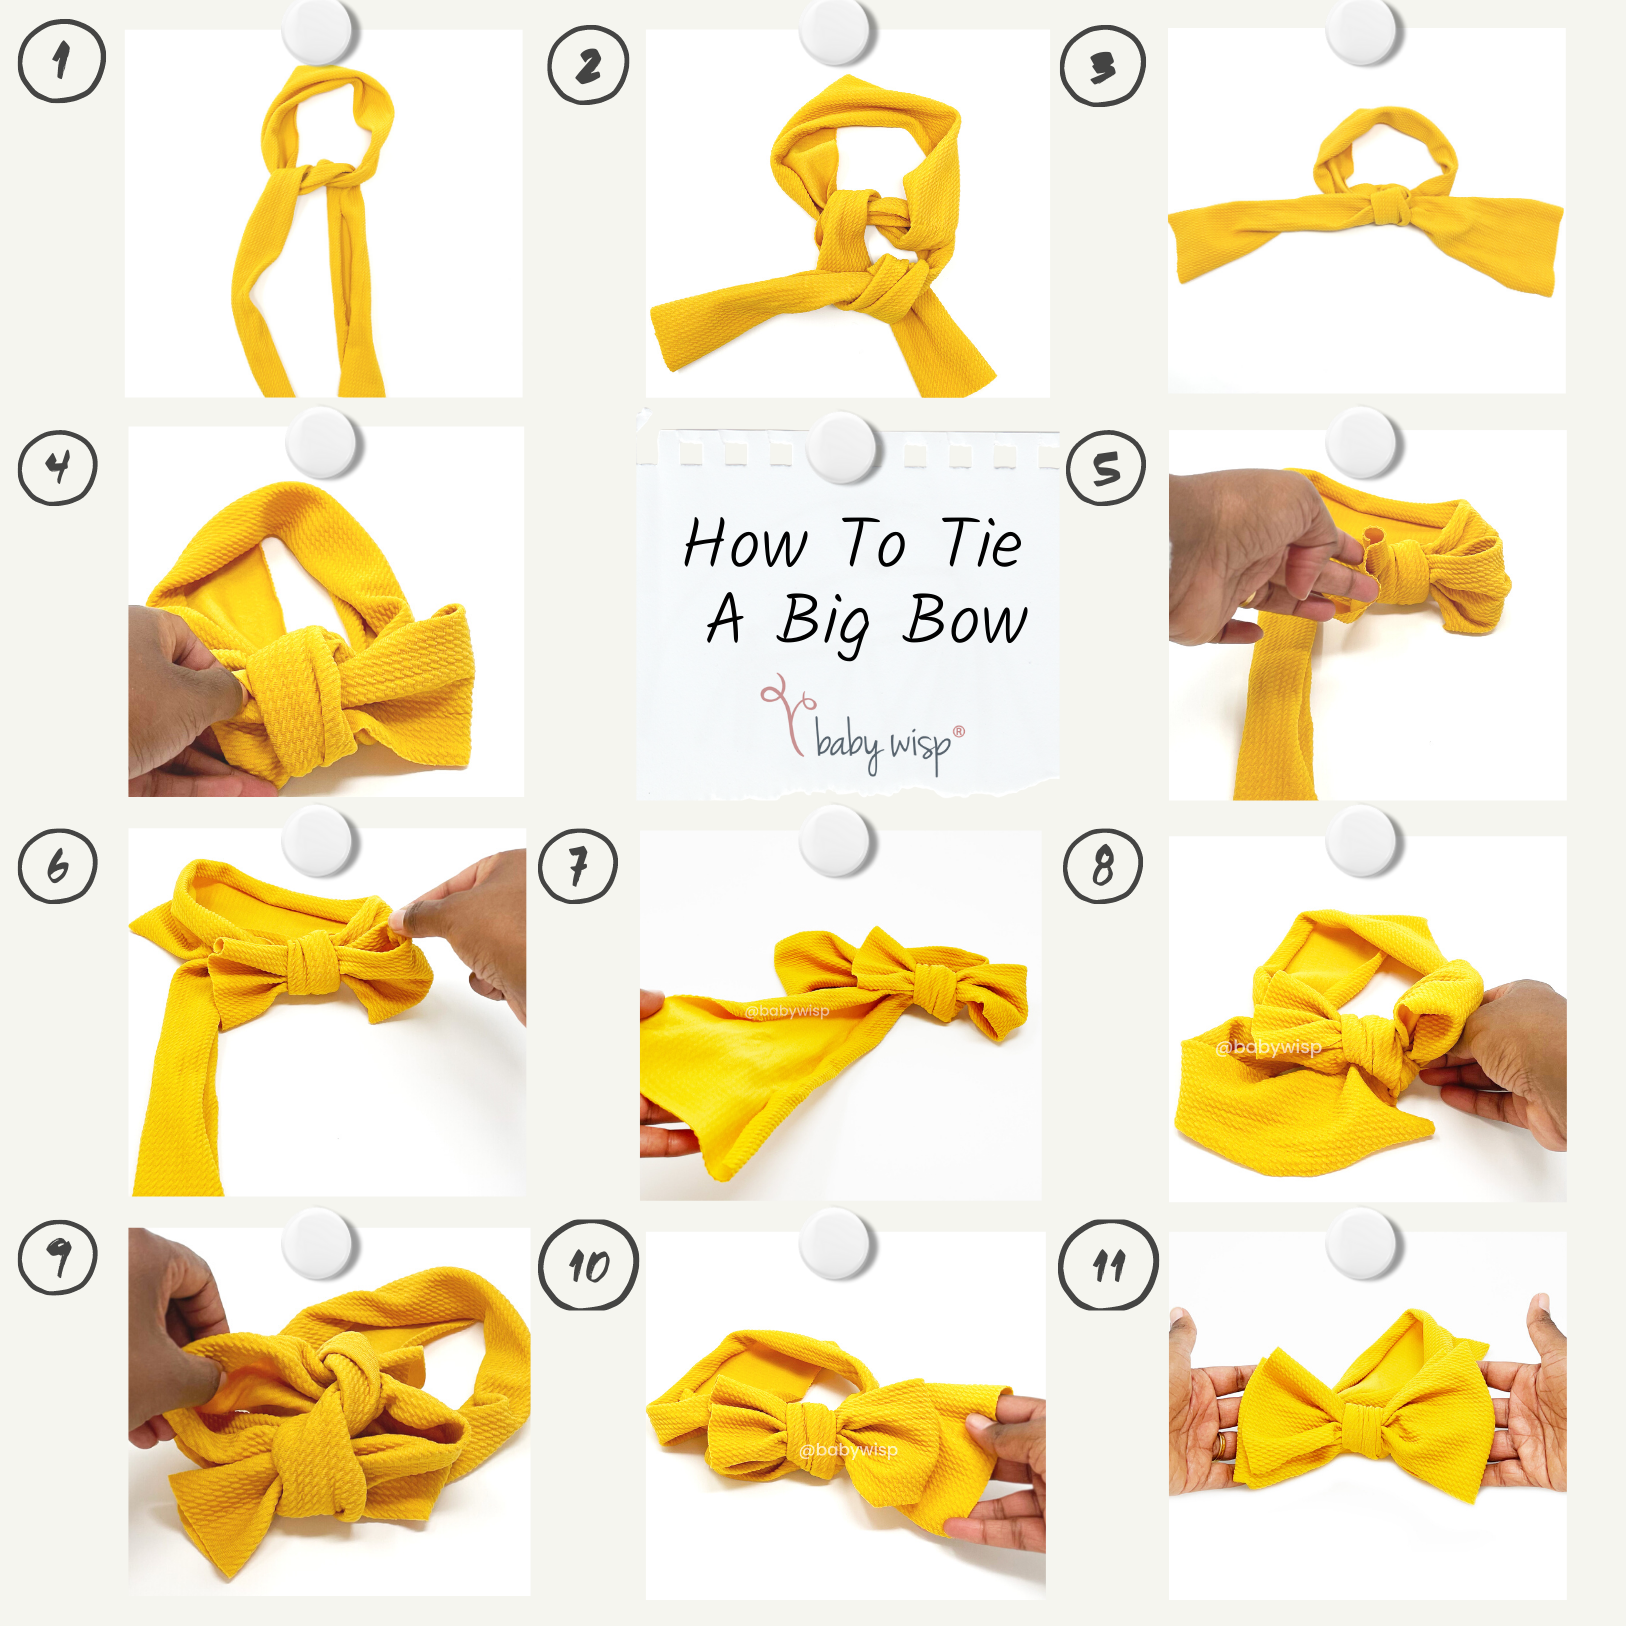 Lana Bow Headband: Step by Step on How To Tie A Big Bow